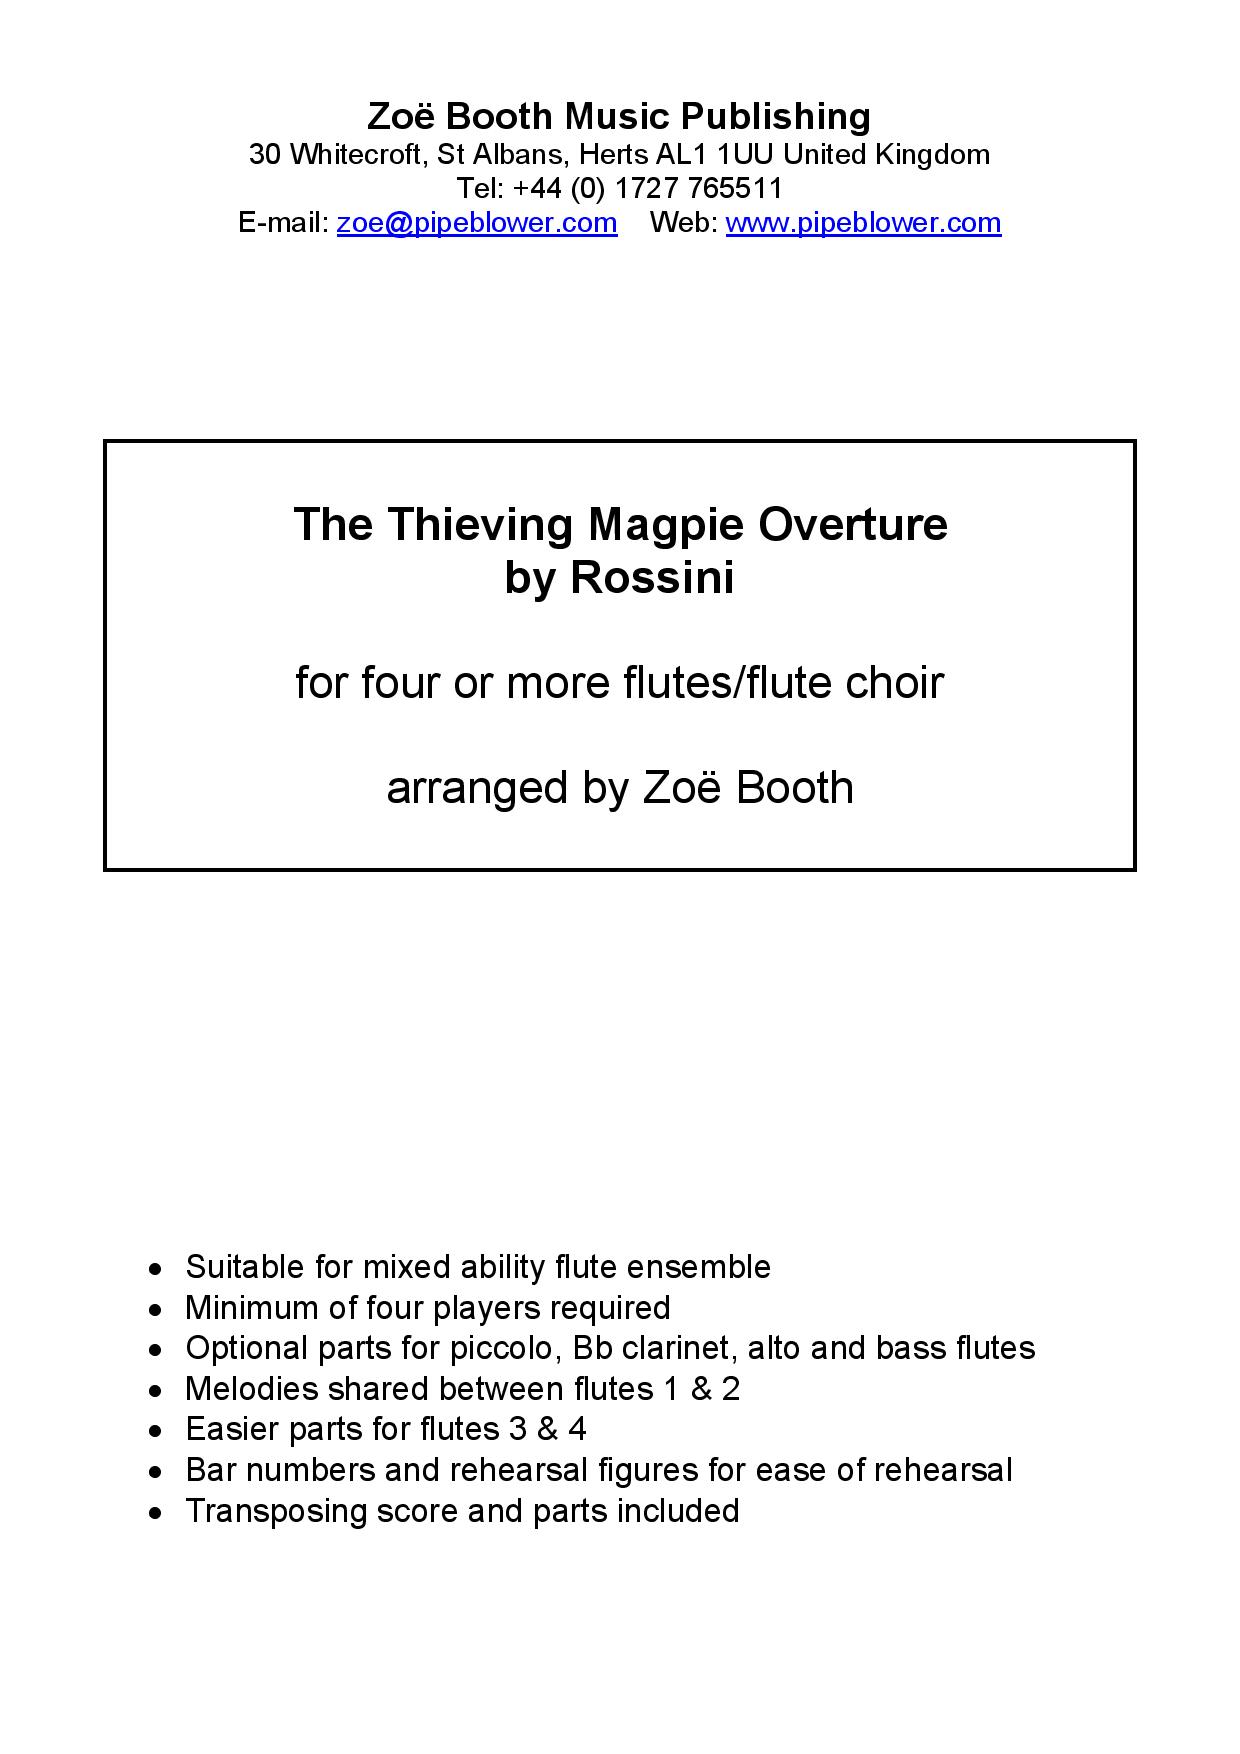 The Thieving Magpie Overture by Rossini,  arranged by Zoë Booth for four or more flutes/flute choir